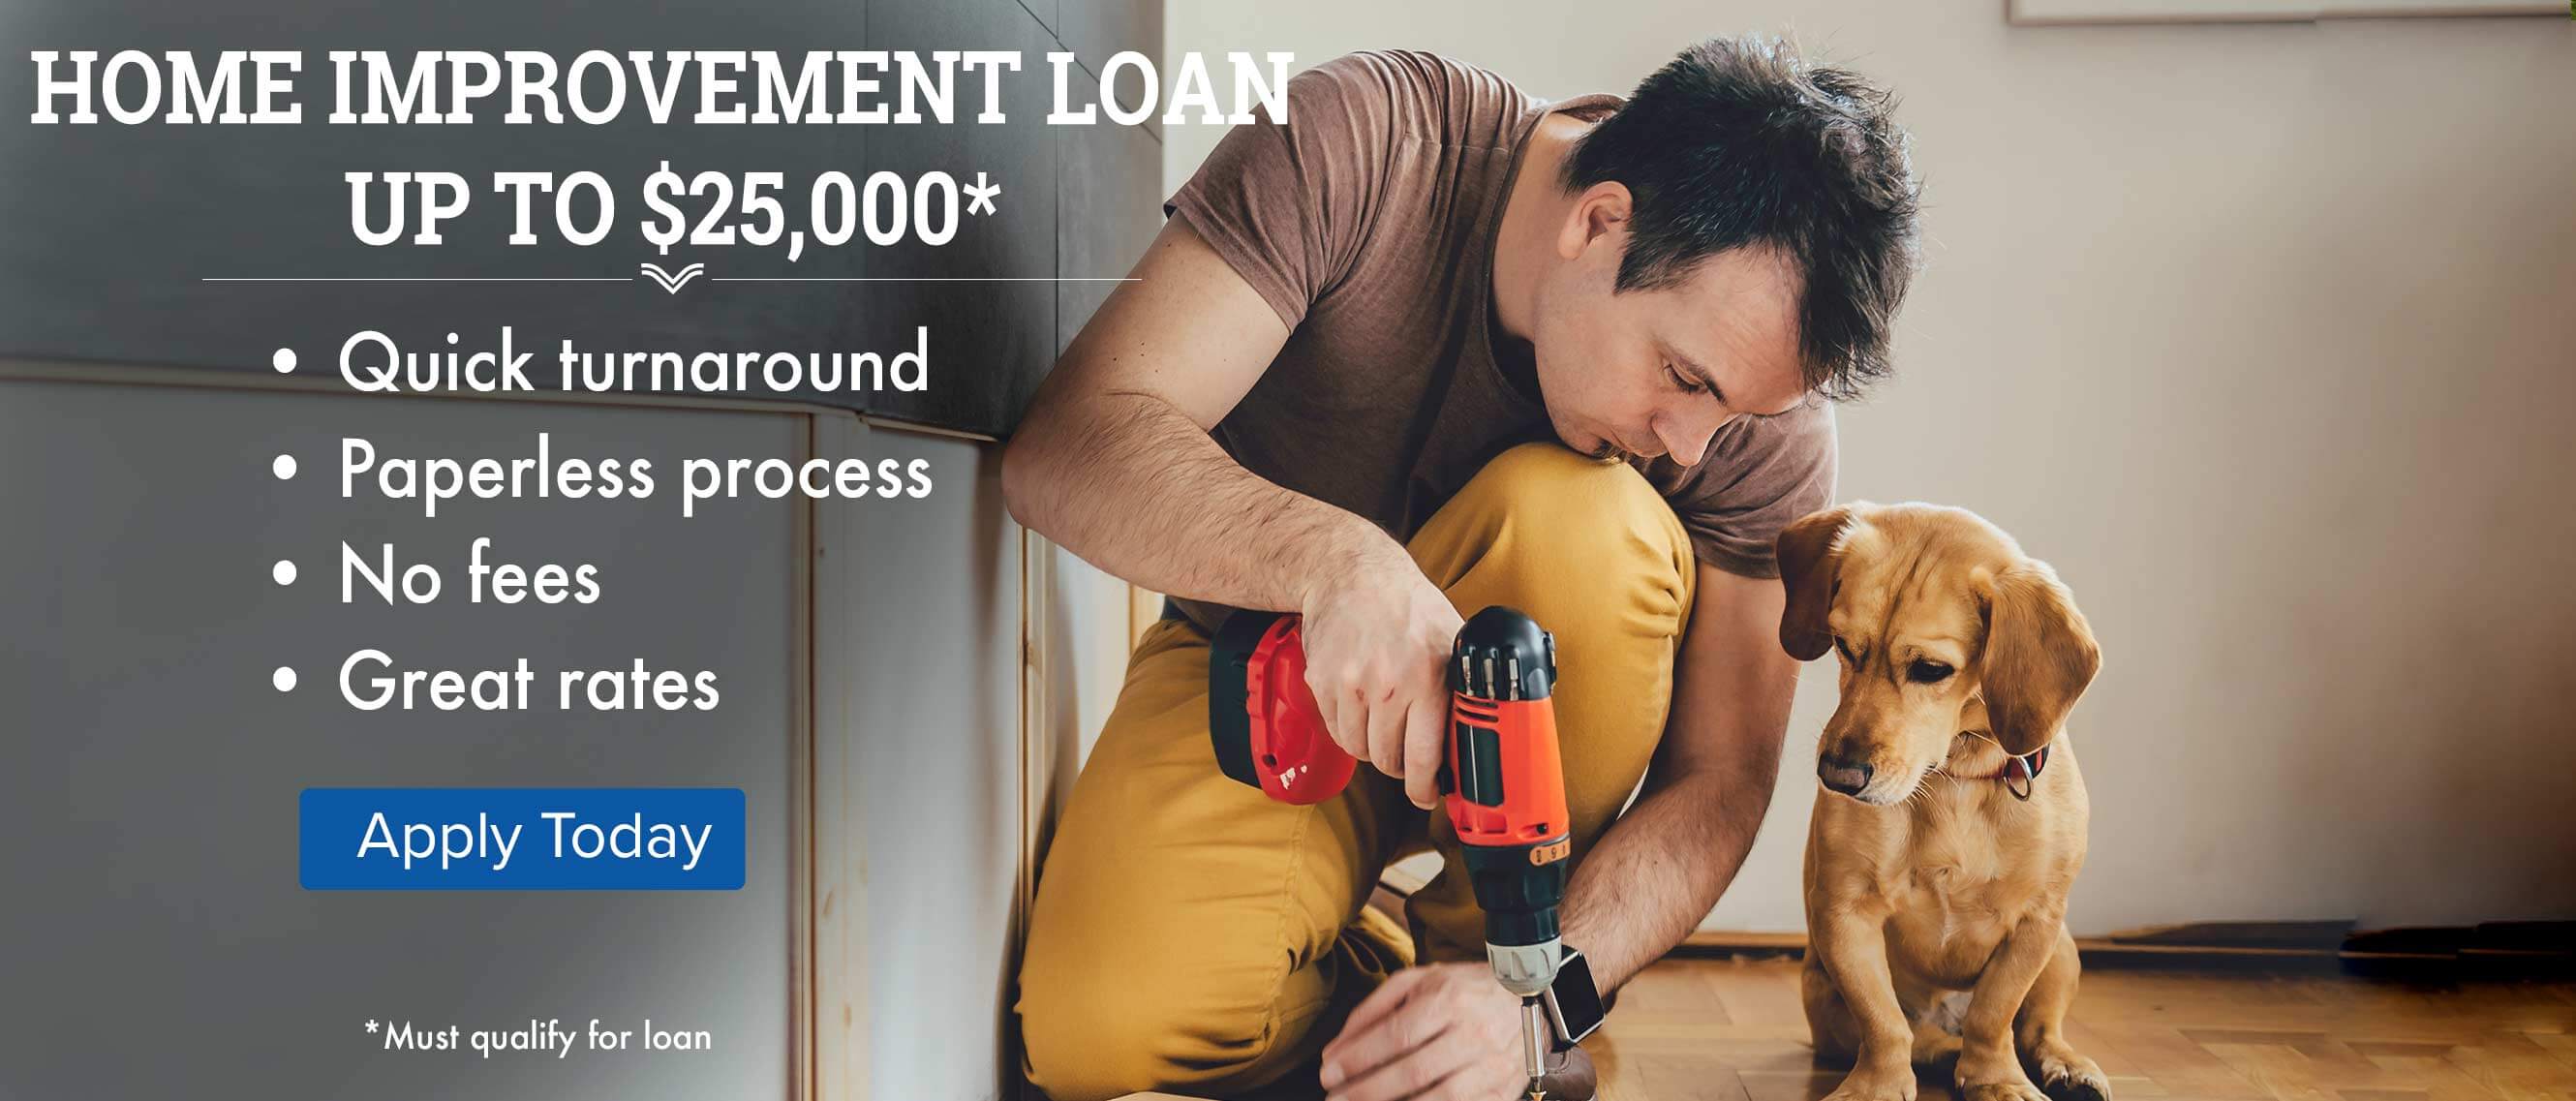 Home Improvement Loan Up to $25,000, Apply Today